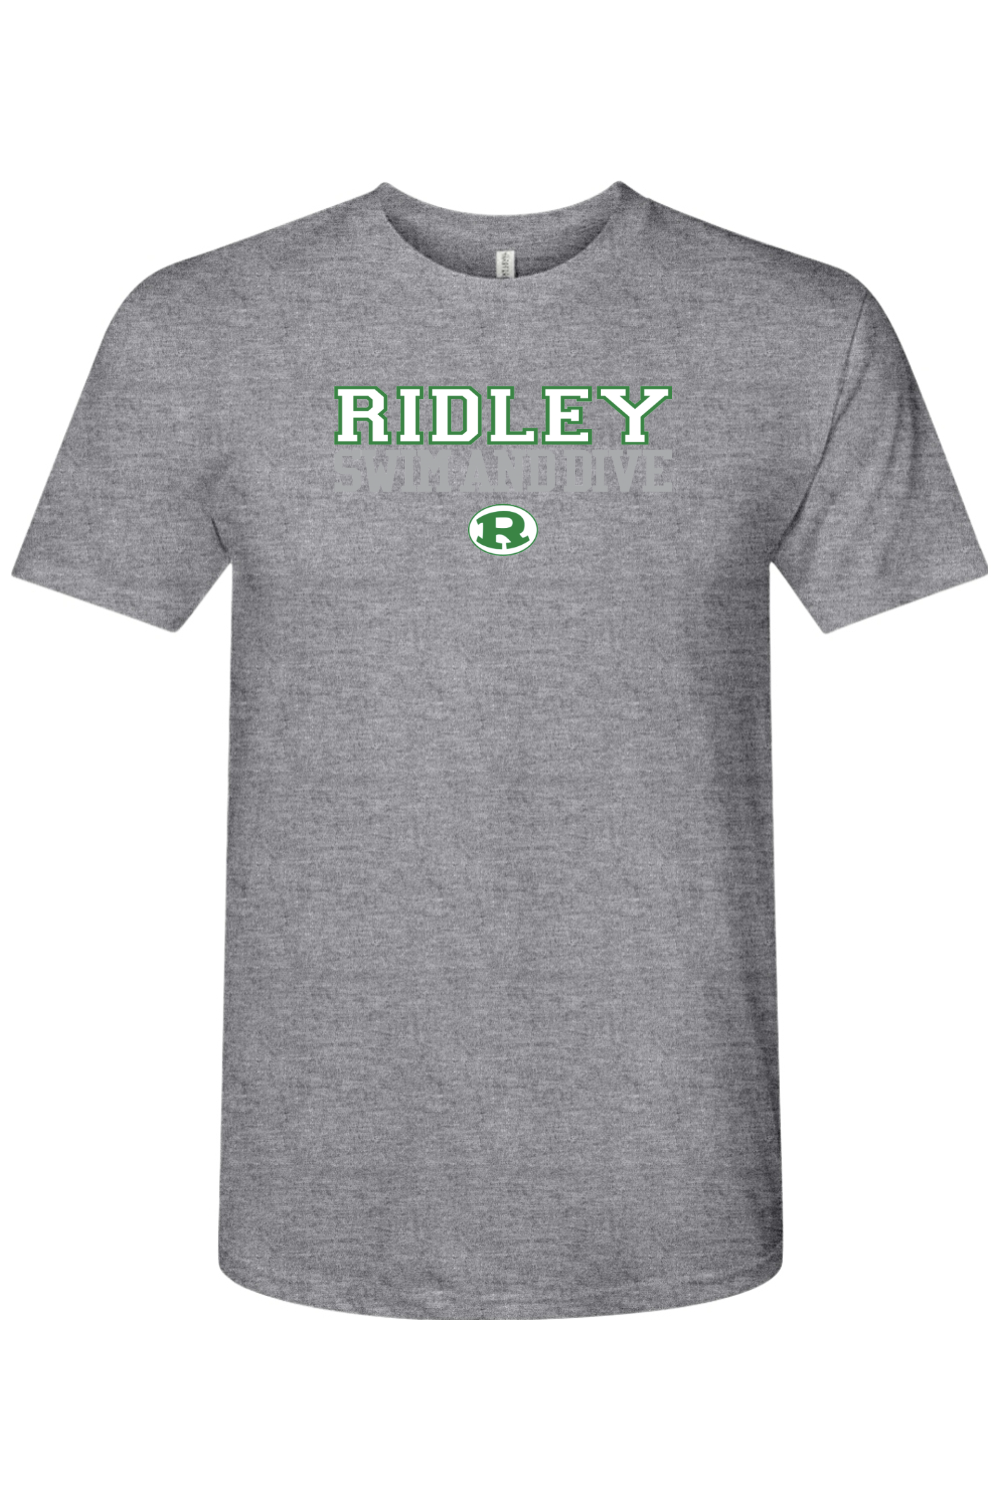 Ridley Swim and Dive Triblend T-Shirt